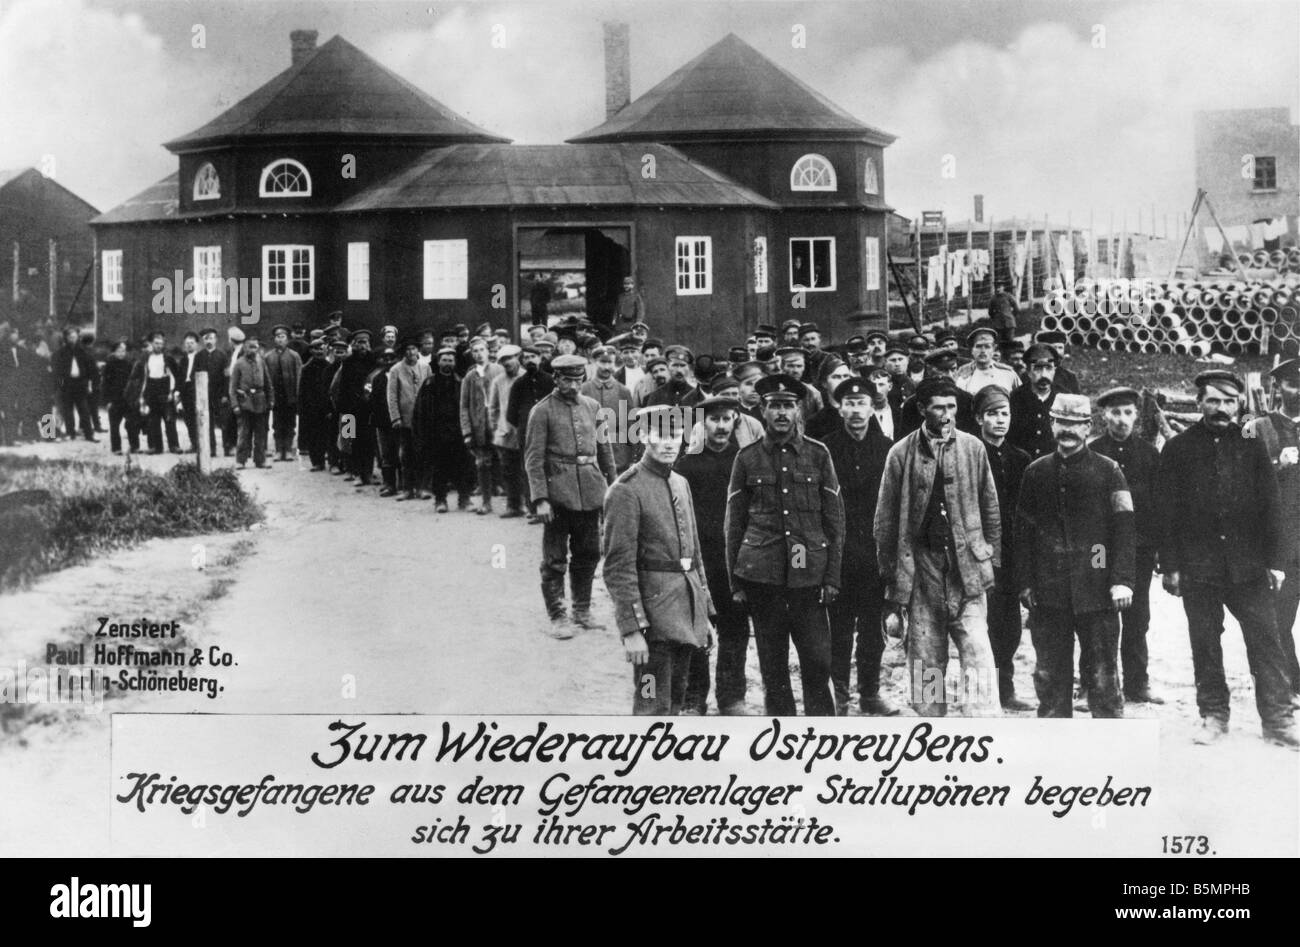 9 1916 0 0 A3 E Prisoners of War in Stalluponen camp World War 1 Prisoners of War in prisoner camp in Stalluponen East Prussia i Stock Photo